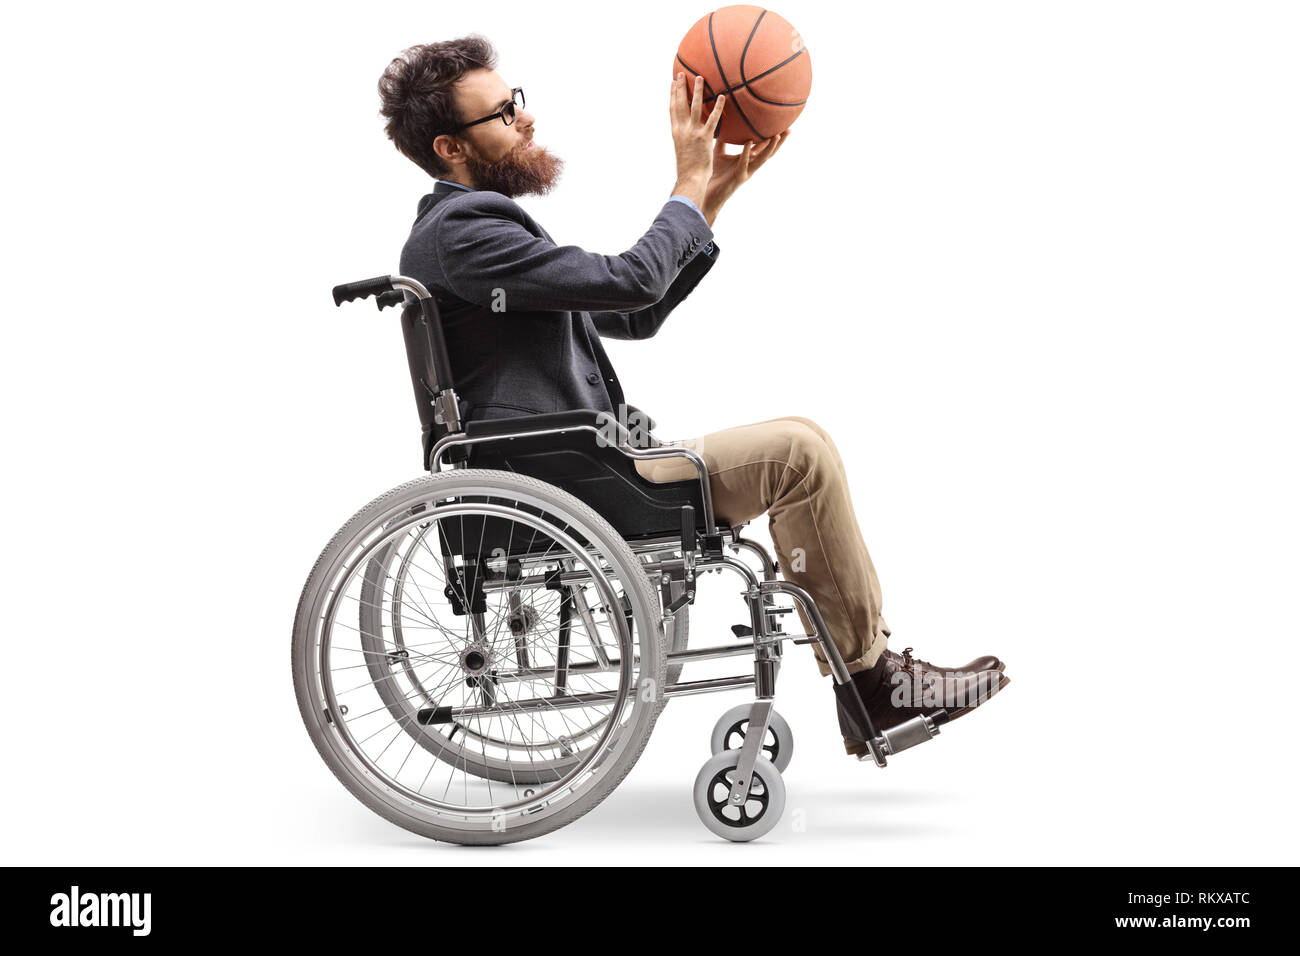 Full length profile shot of a young man in a wheelchair holding a basketball isolated on white background Stock Photo